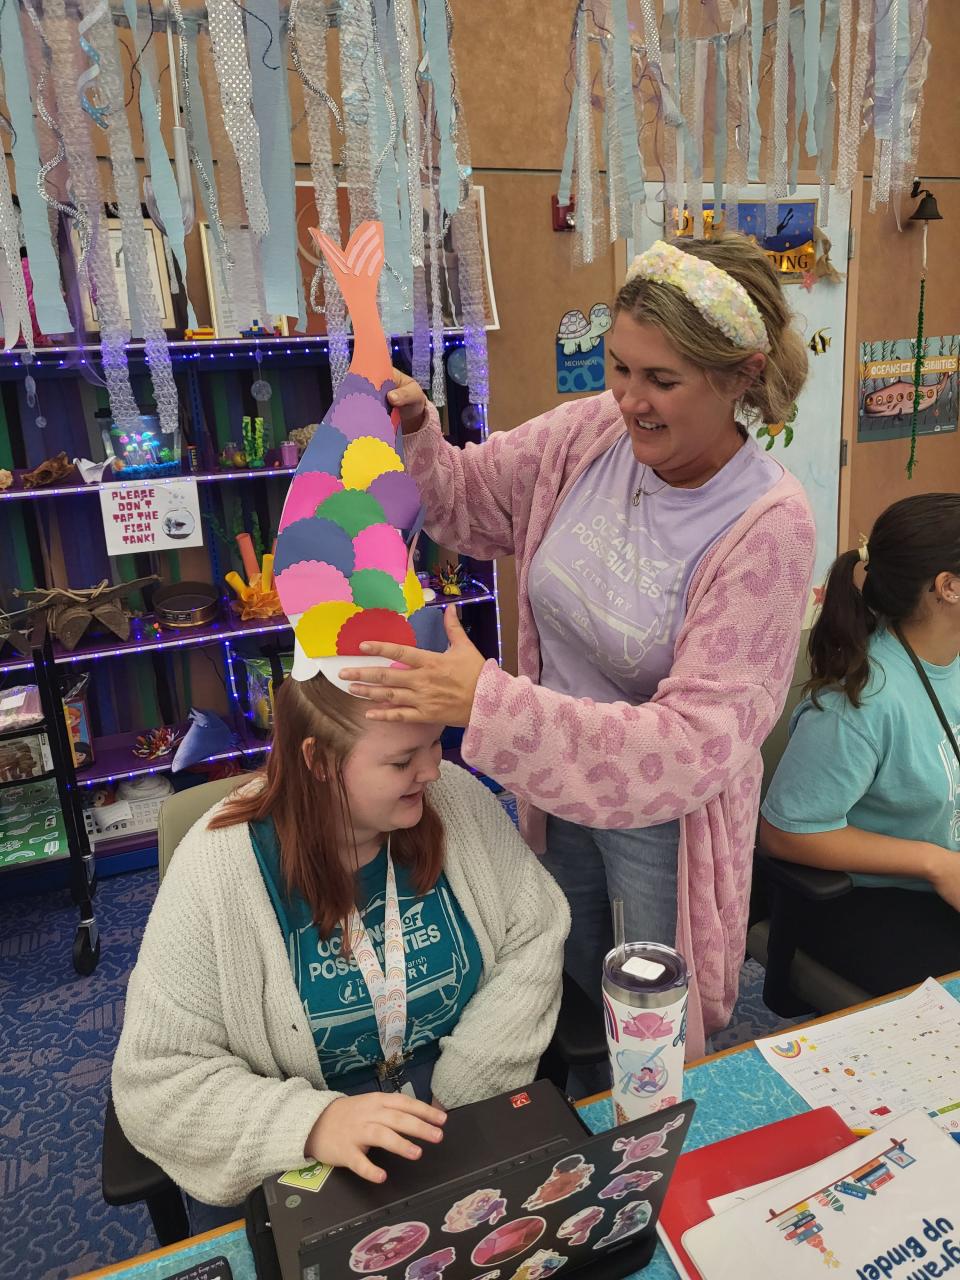 Librarians Brooke Jones, 20 and Megan Hutchinson, 38, show off the fish crown Tuesday. The crown will go to Emily Daigle, the librarian who suggested the name Bubbles for the beta fish that serves as the summer reading program's mascot.